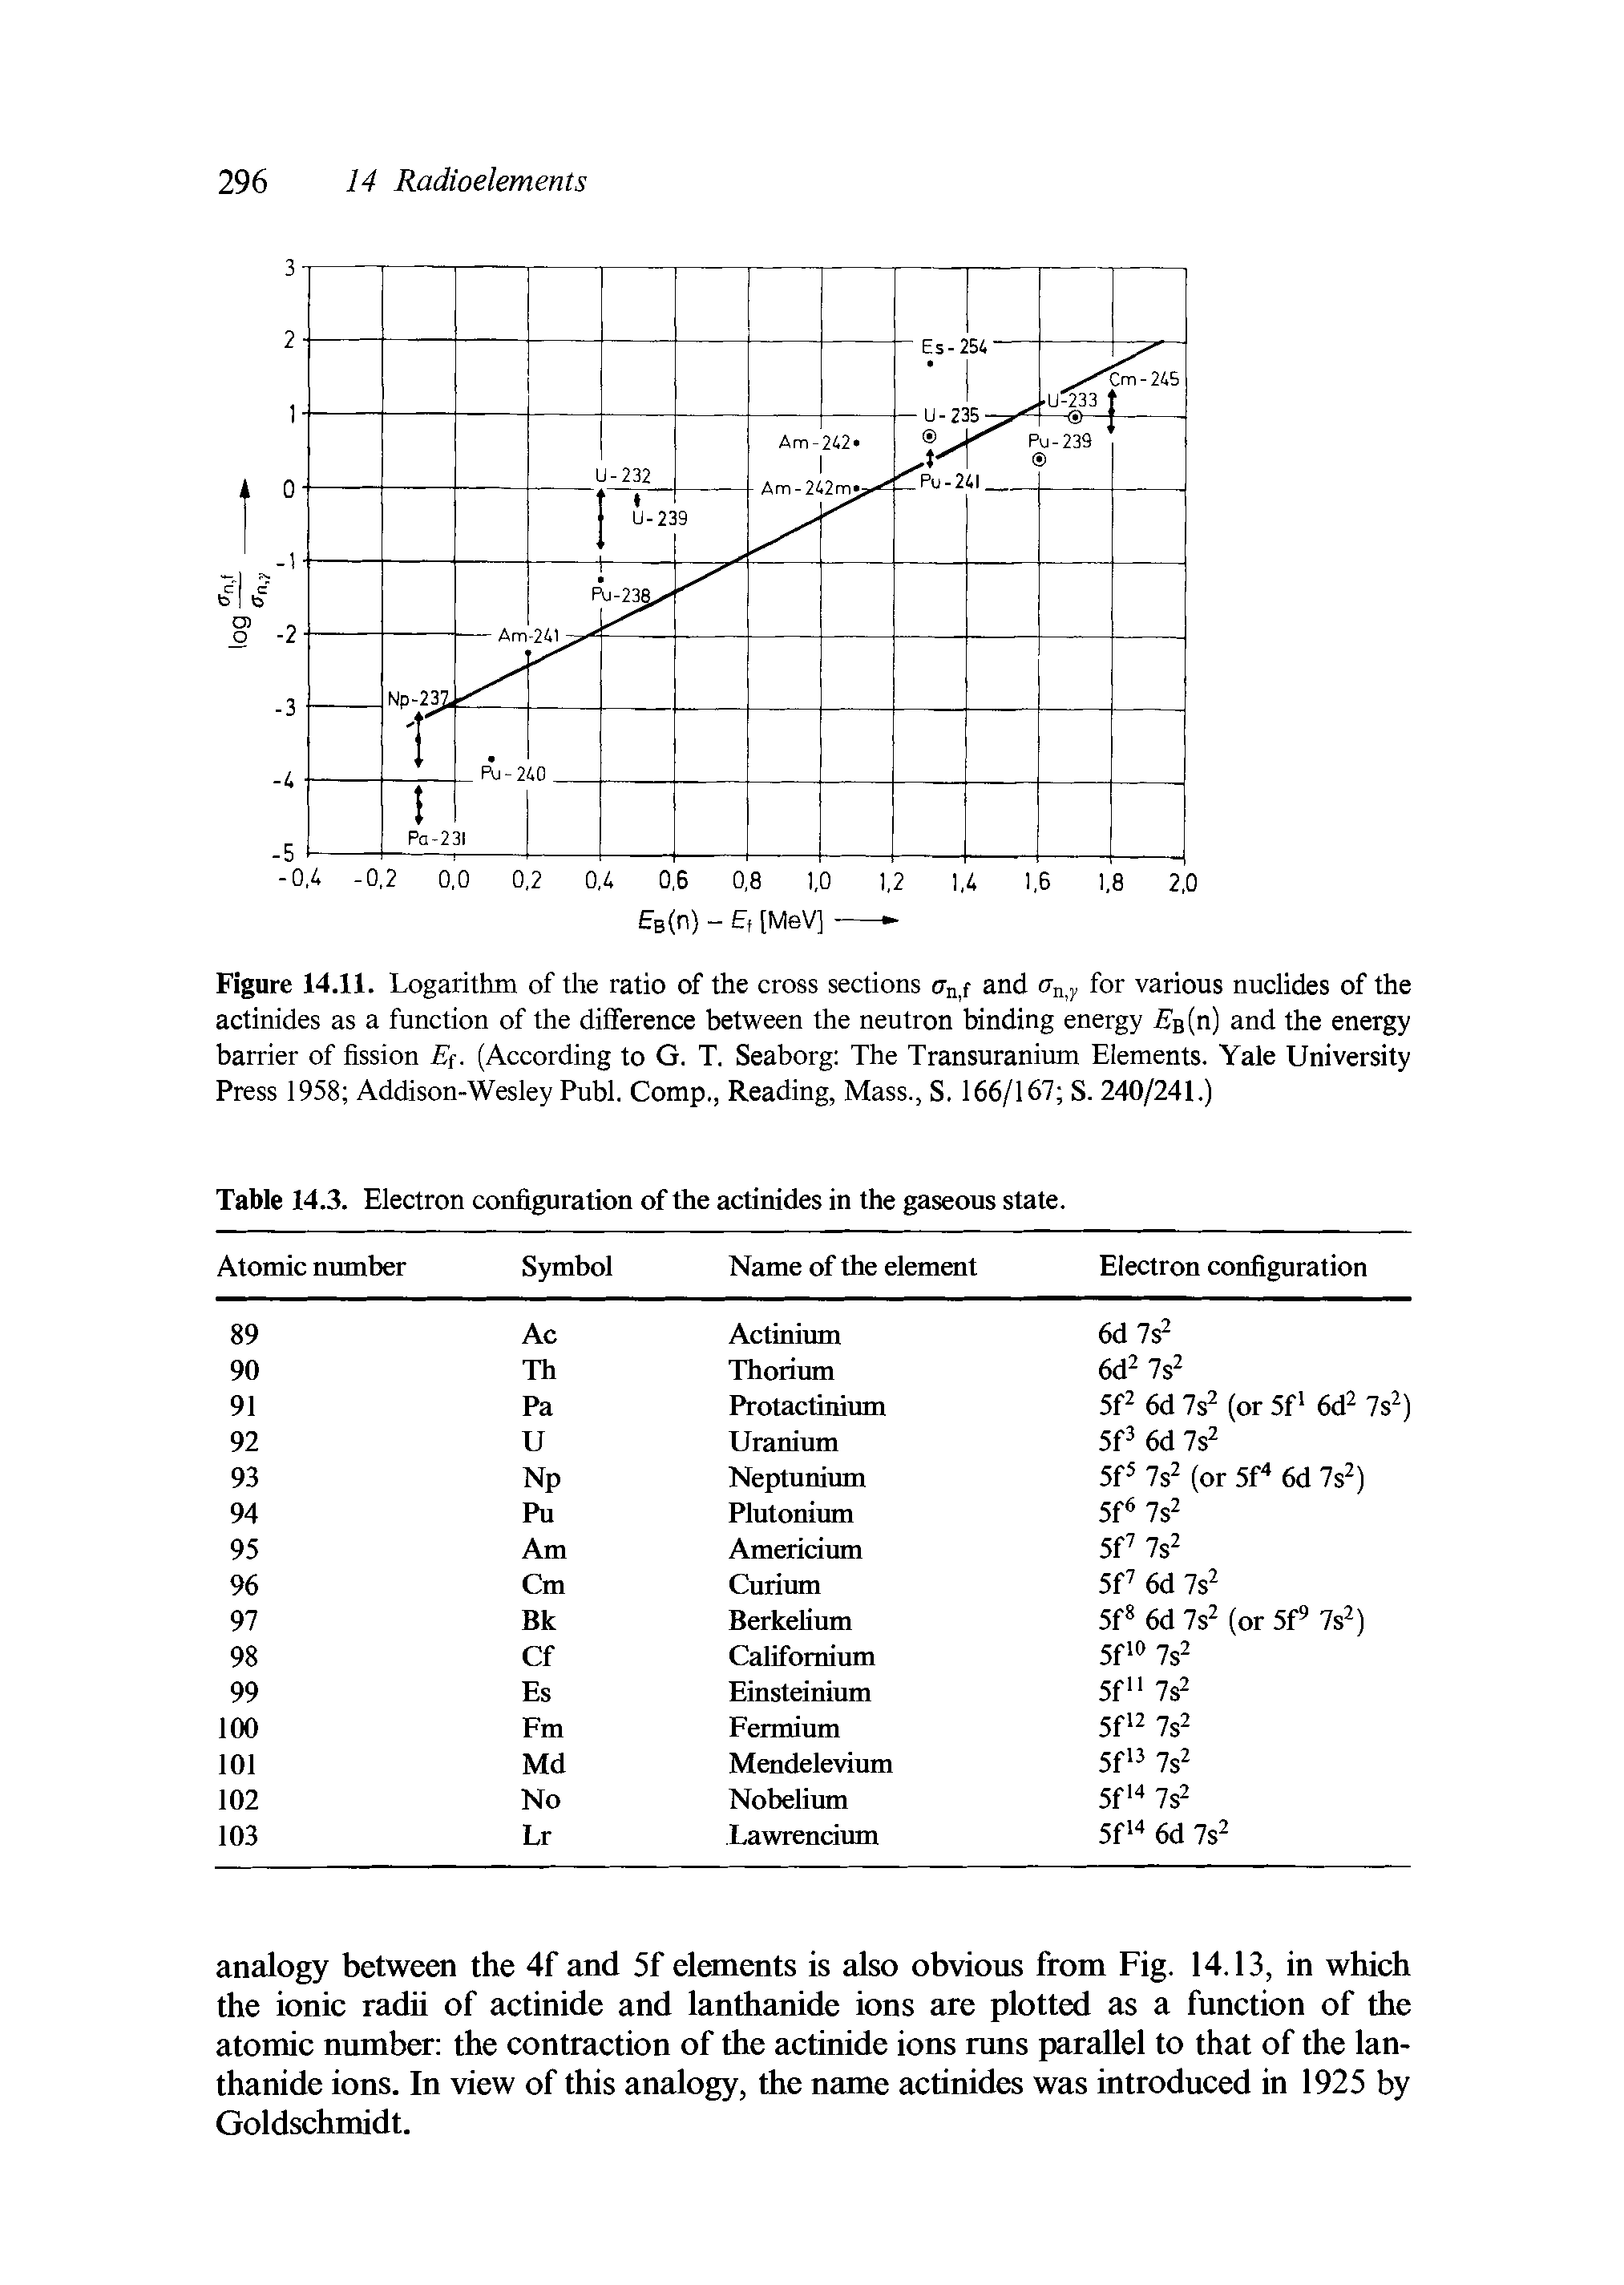 Figure 14.11. Logarithm of the ratio of the cross sections (Tn,f and for various nuclides of the actinides as a function of the difference between the neutron binding energy B(n) and the energy barrier of fission E. (According to G. T. Seaborg The Transuranium Elements. Yale University Press 1958 Addison-Wesley Publ. Comp, Reading, Mass., S, 166/167 S. 240/241.)...